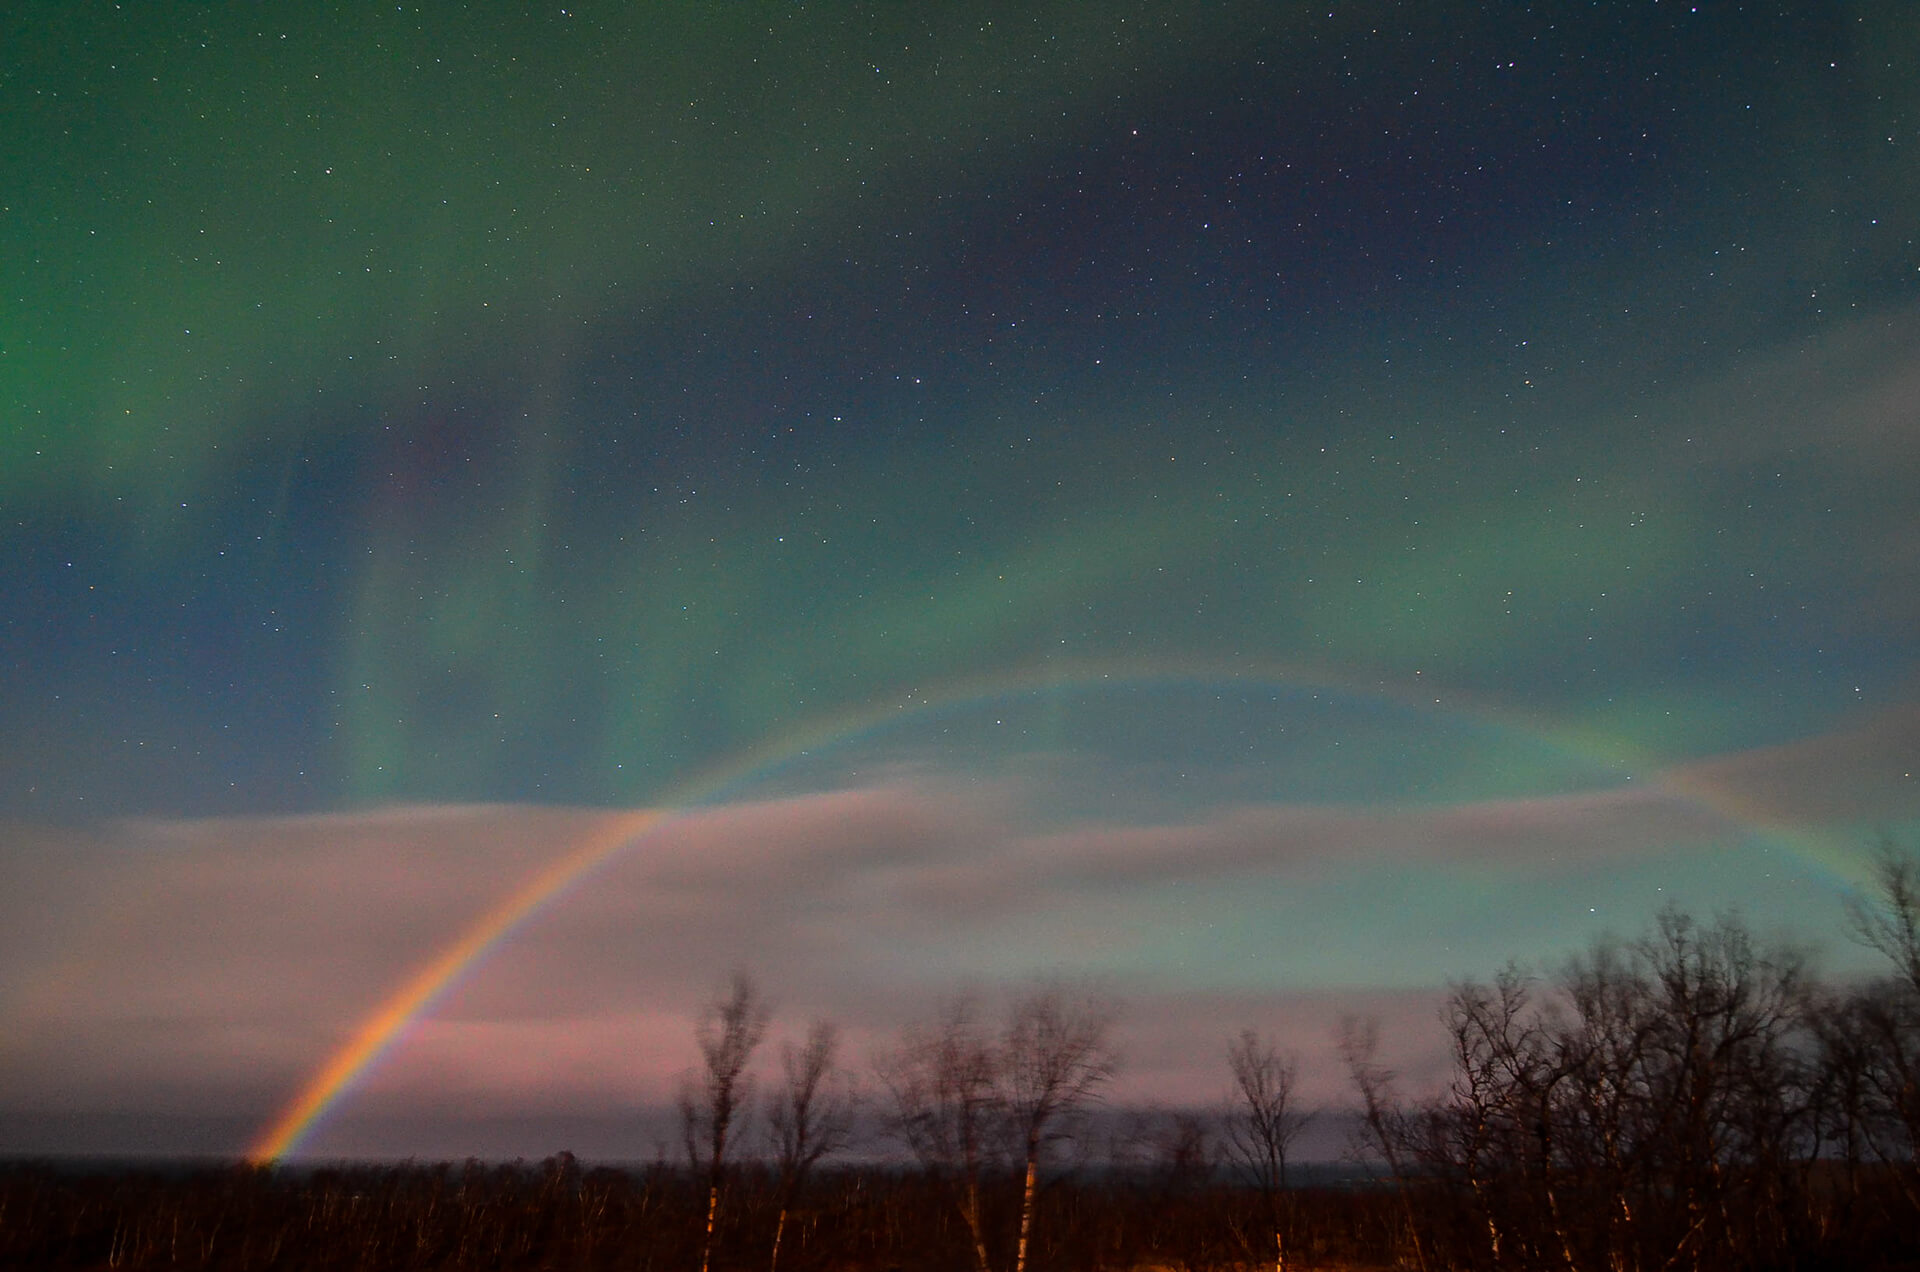 Lights Over Lapland’s webcam captures a rare “moonbow” sharing the sky